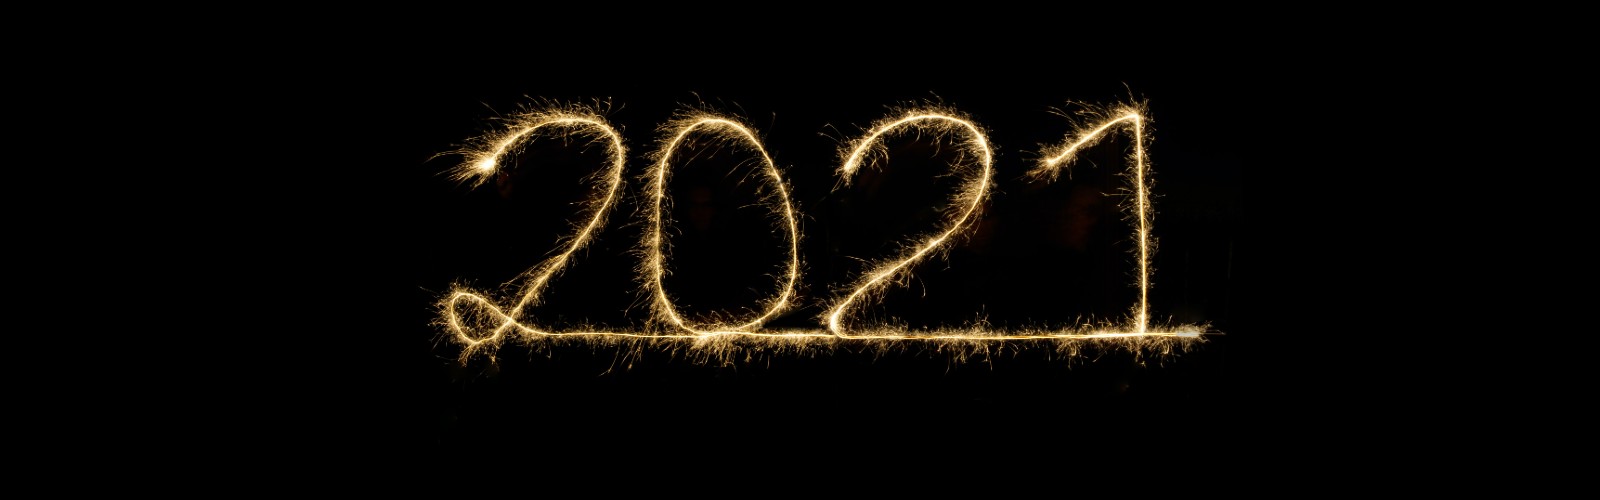 Light painting of 2021 using crackers